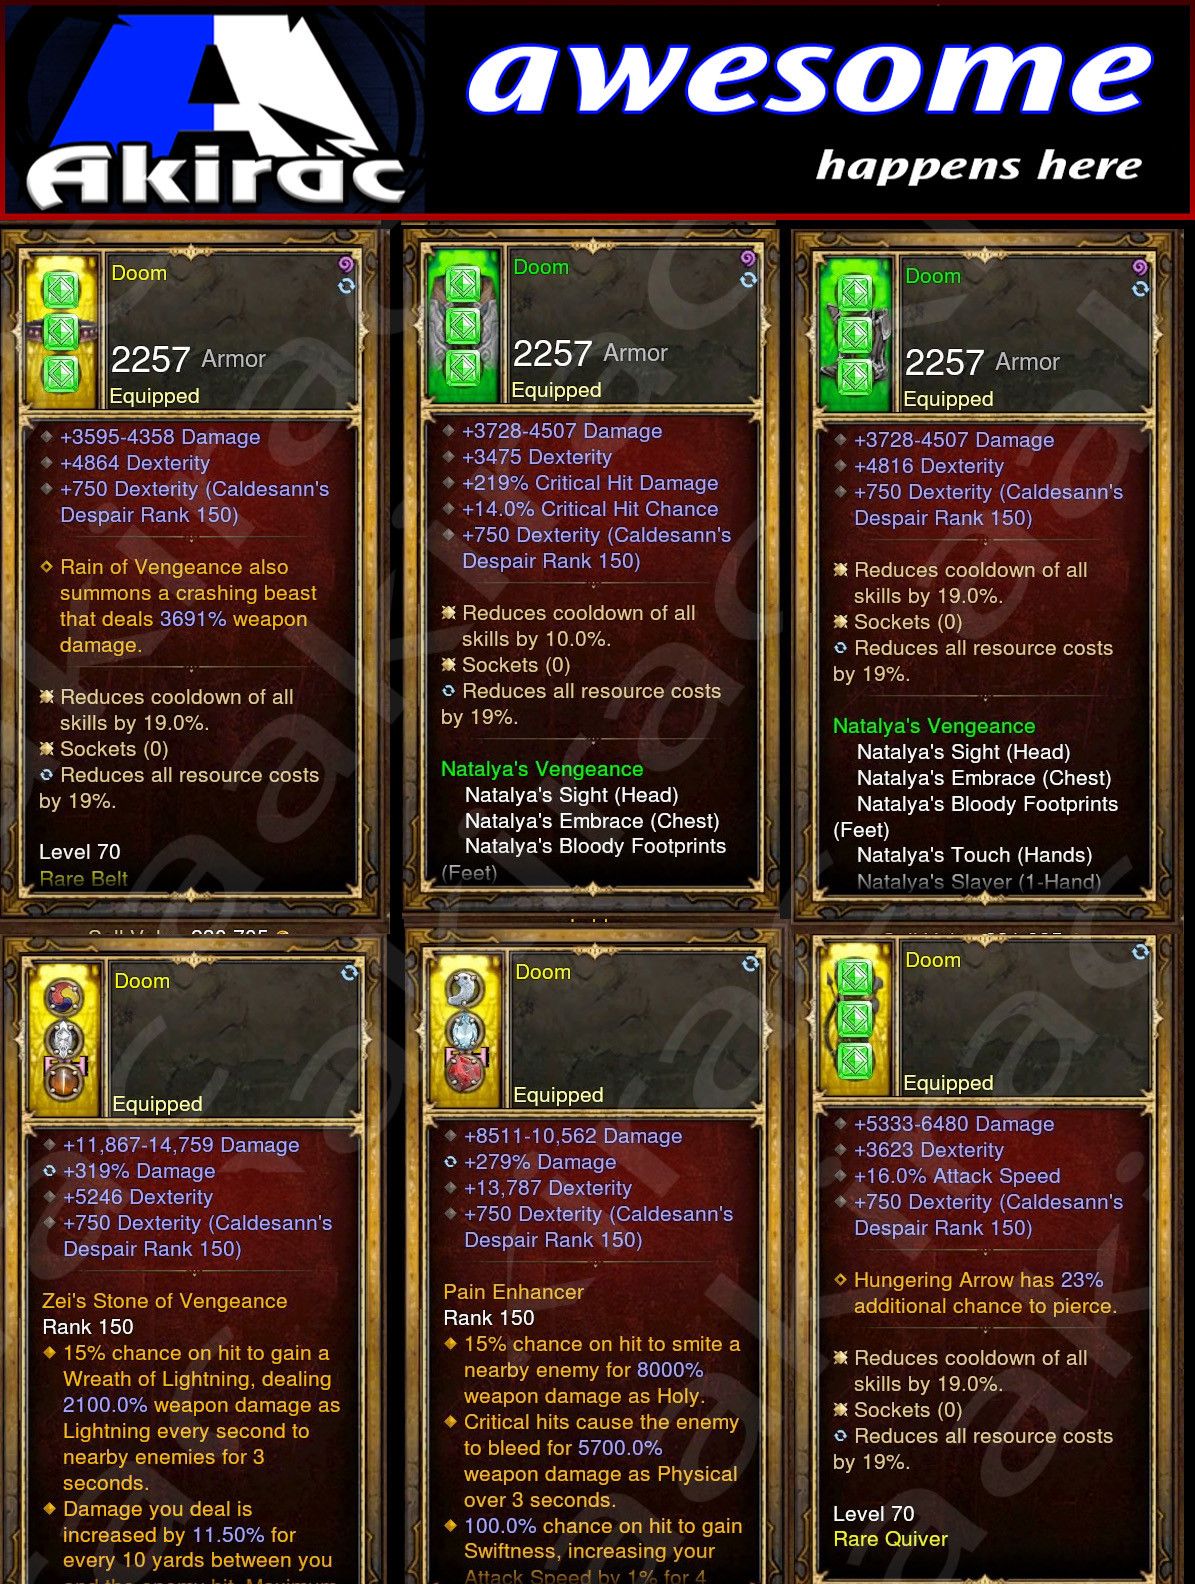 Diablo 3 Immortal v1 Nats Demon Hunter Modded Set for Rift 150 Doom Diablo 3 Mods ROS Seasonal and Non Seasonal Save Mod - Modded Items and Gear - Hacks - Cheats - Trainers for Playstation 4 - Playstation 5 - Nintendo Switch - Xbox One